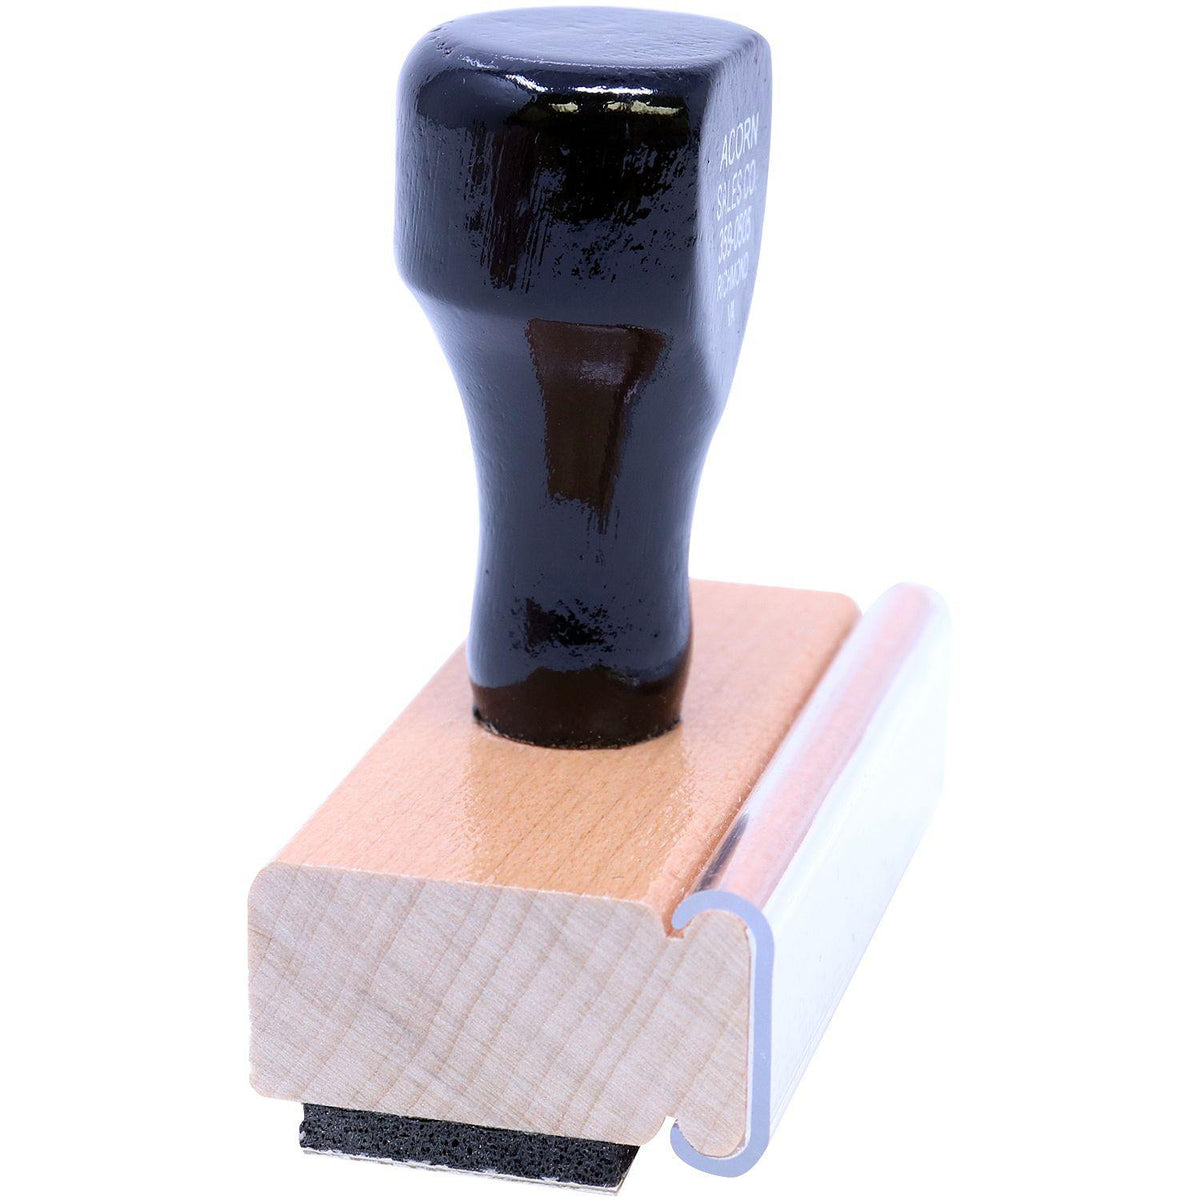 Large Trust Rubber Stamp - Engineer Seal Stamps - Brand_Acorn, Impression Size_Large, Stamp Type_Regular Stamp, Type of Use_Finance